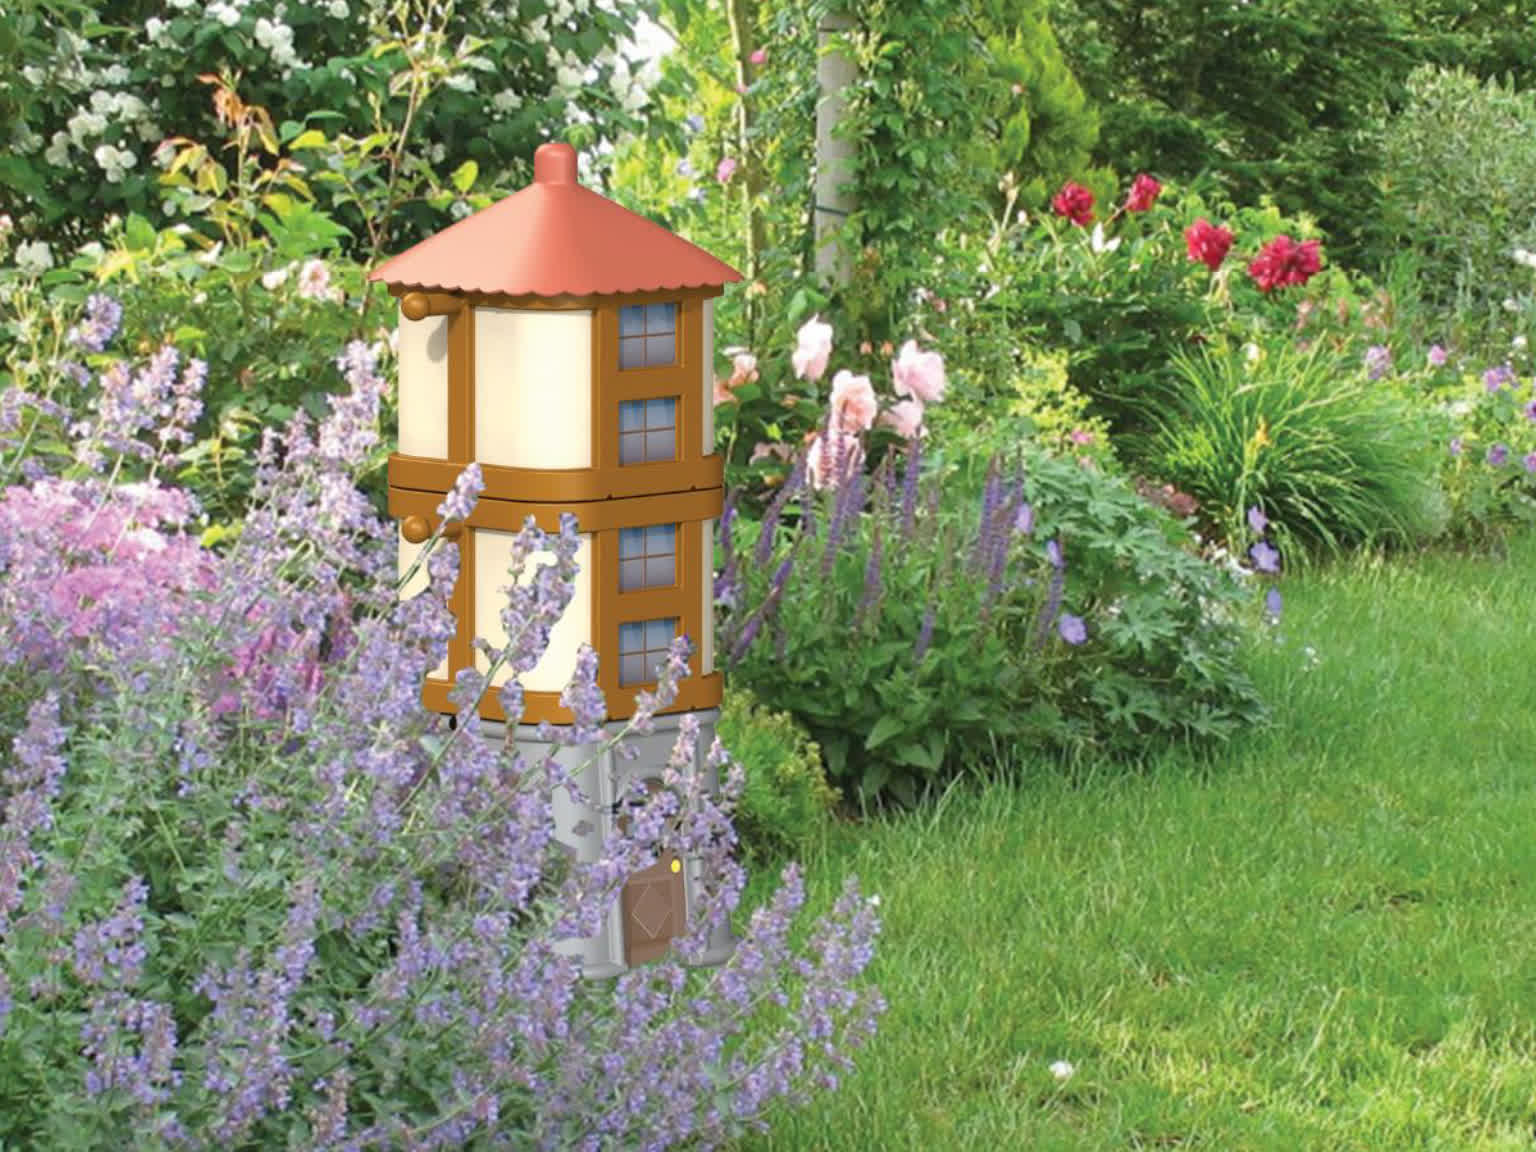 Thumbnail image: A garden composter, shaped like a moomin house, pictured in a flowery garden